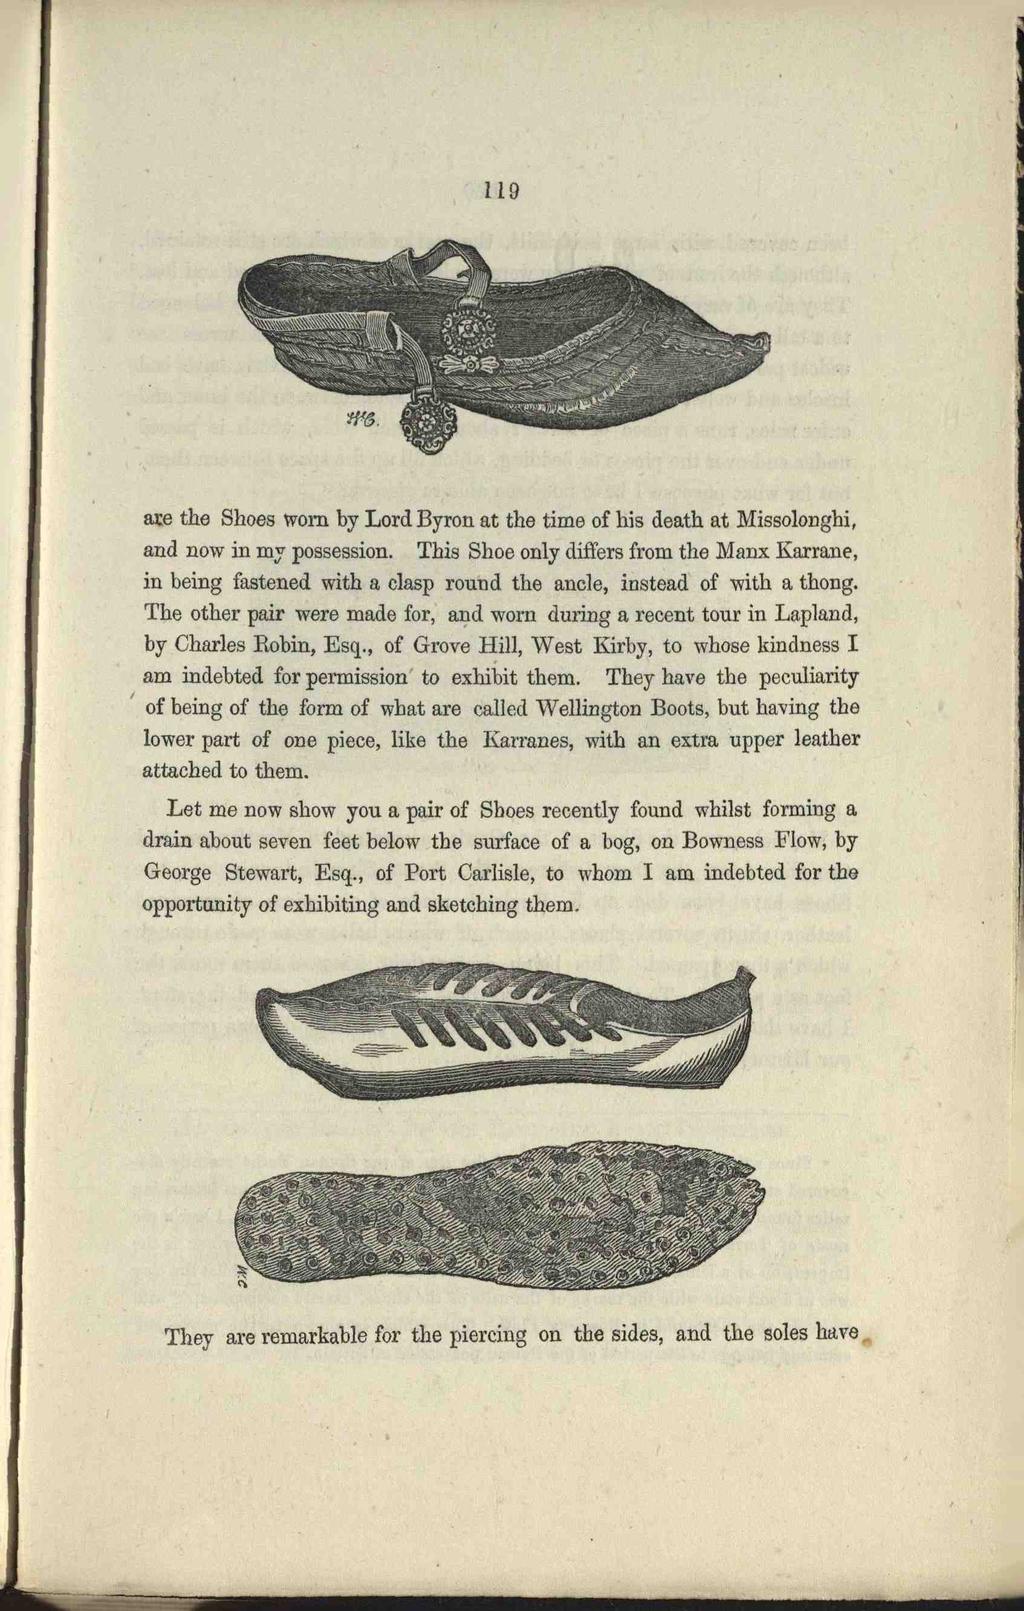 119 ate the Shoes worn by Lord Byron at the time of his death at Missolonghi, and now in my possession.